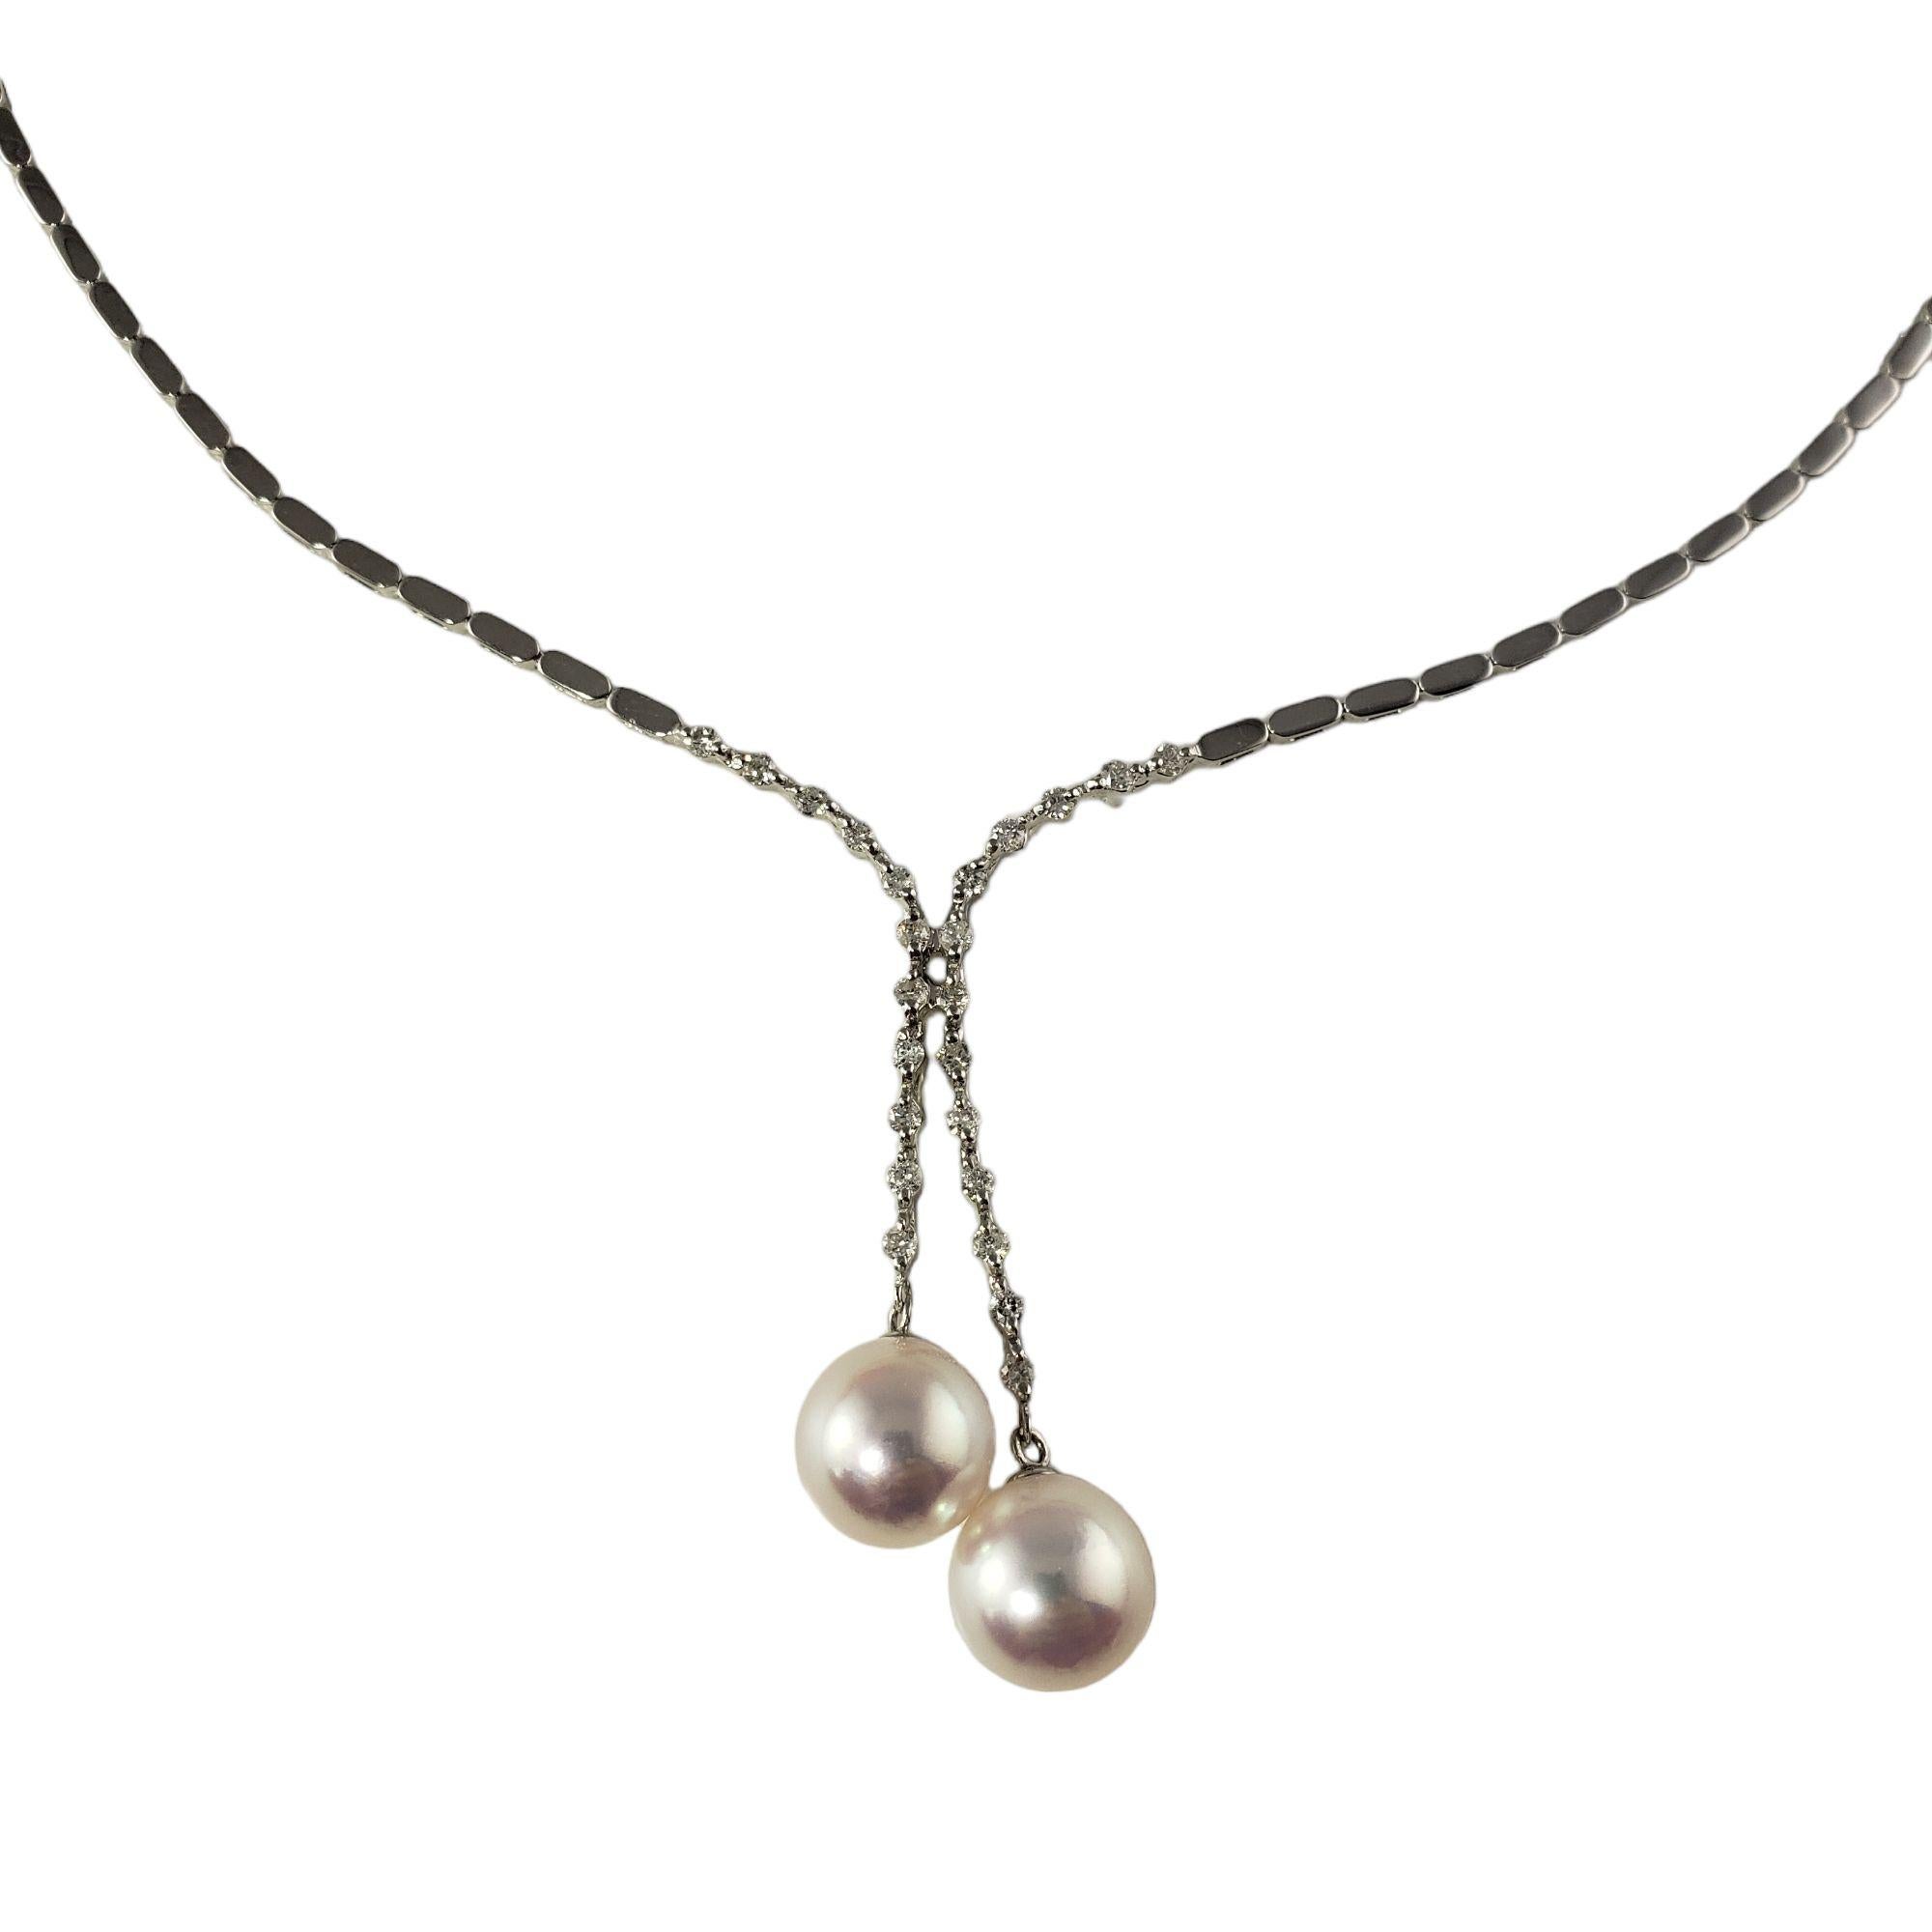 18 Karat White Gold Akoya Pearl and Diamond Necklace #13909 In Good Condition For Sale In Washington Depot, CT